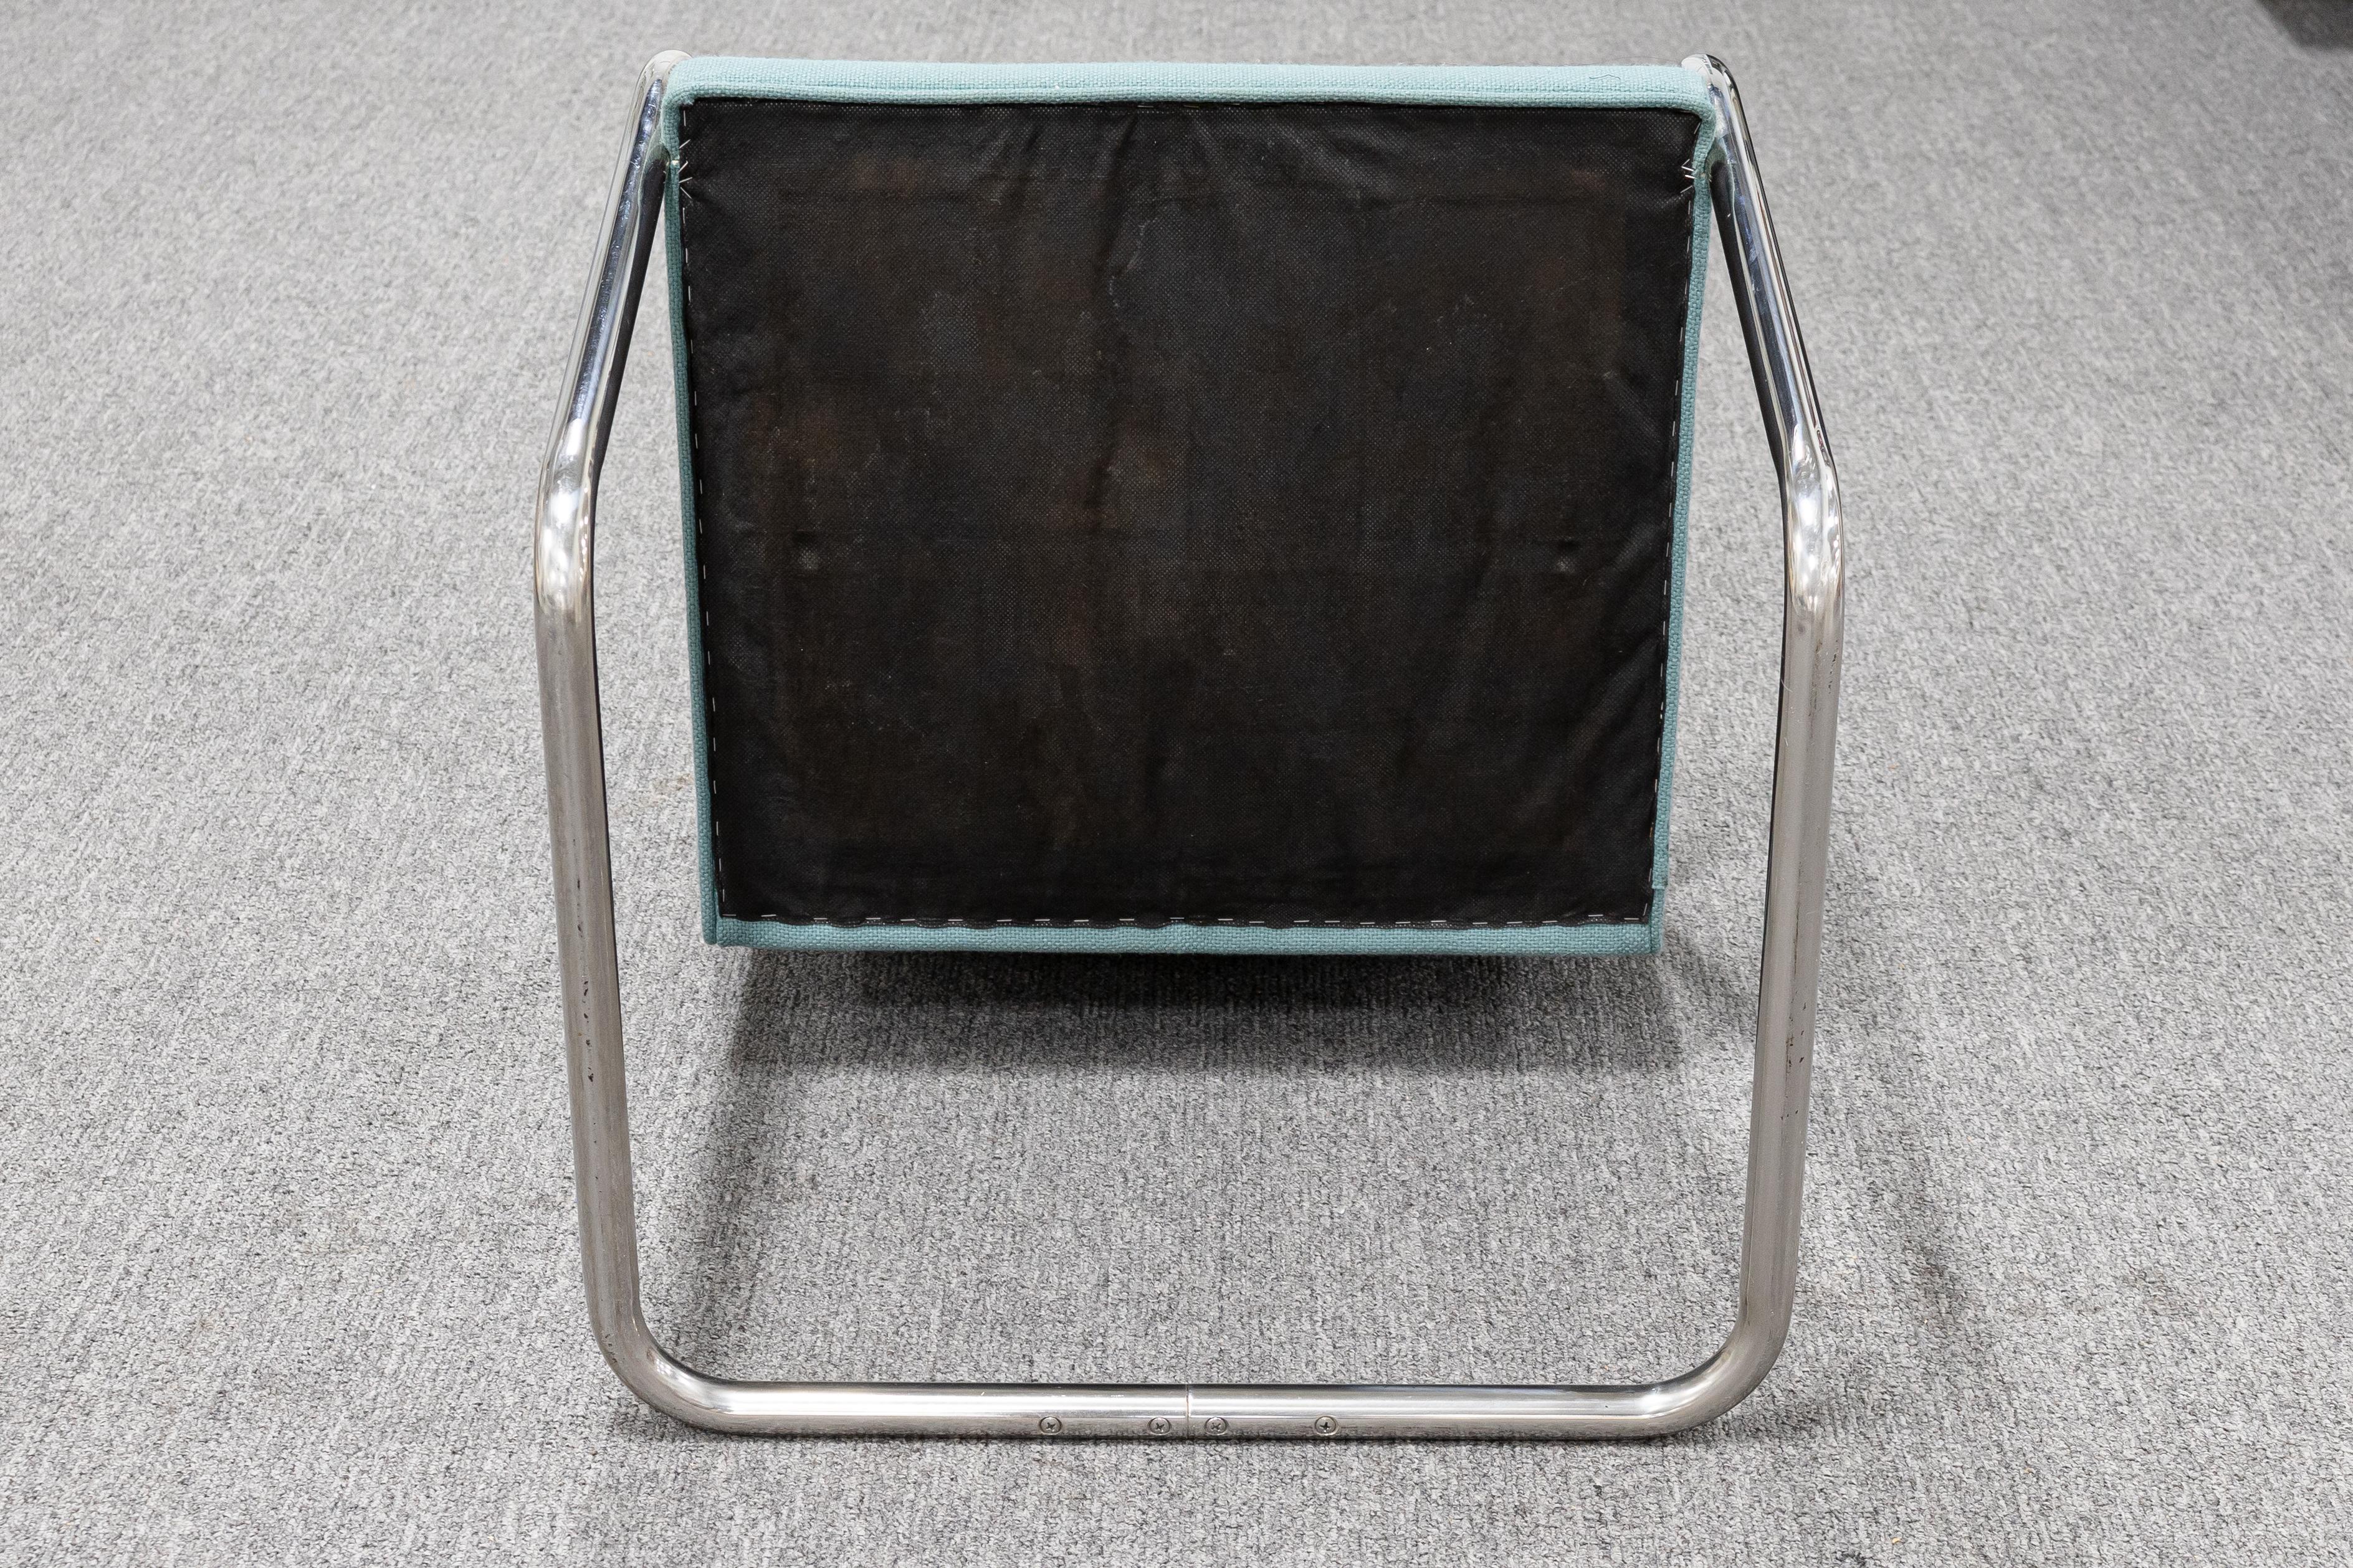 20th Century Thonet Set of 4 Tubular Steel Cantilever Modern Chairs Teal Upholstery Seating